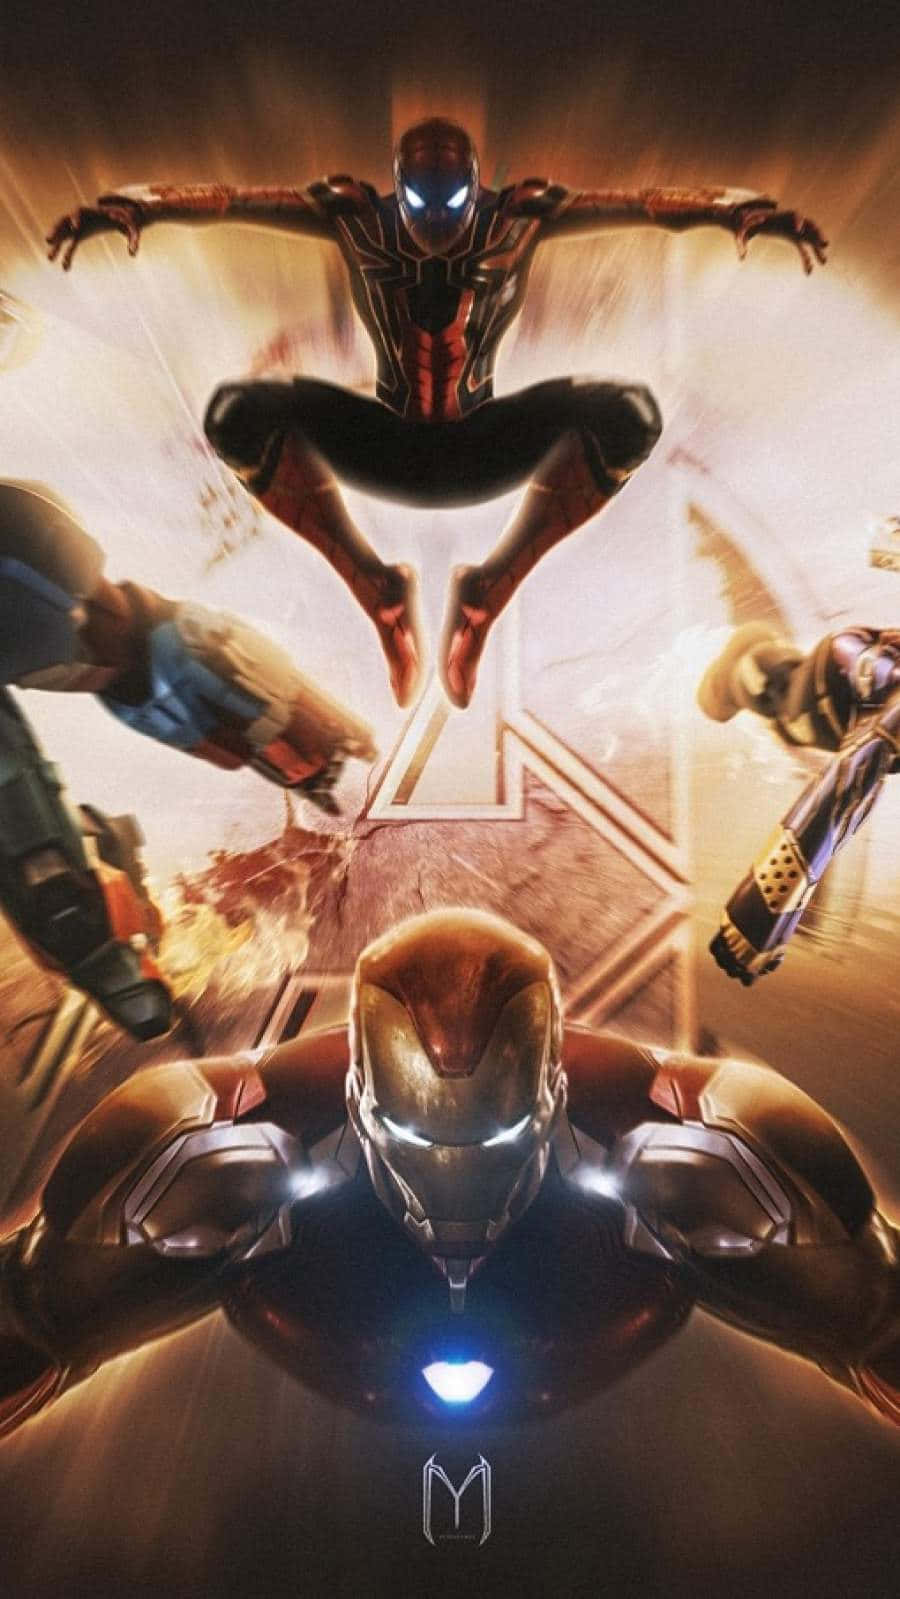 "FRIENDS TO ENEMIES: Spider-Man and Iron Man go head-to-head" Wallpaper